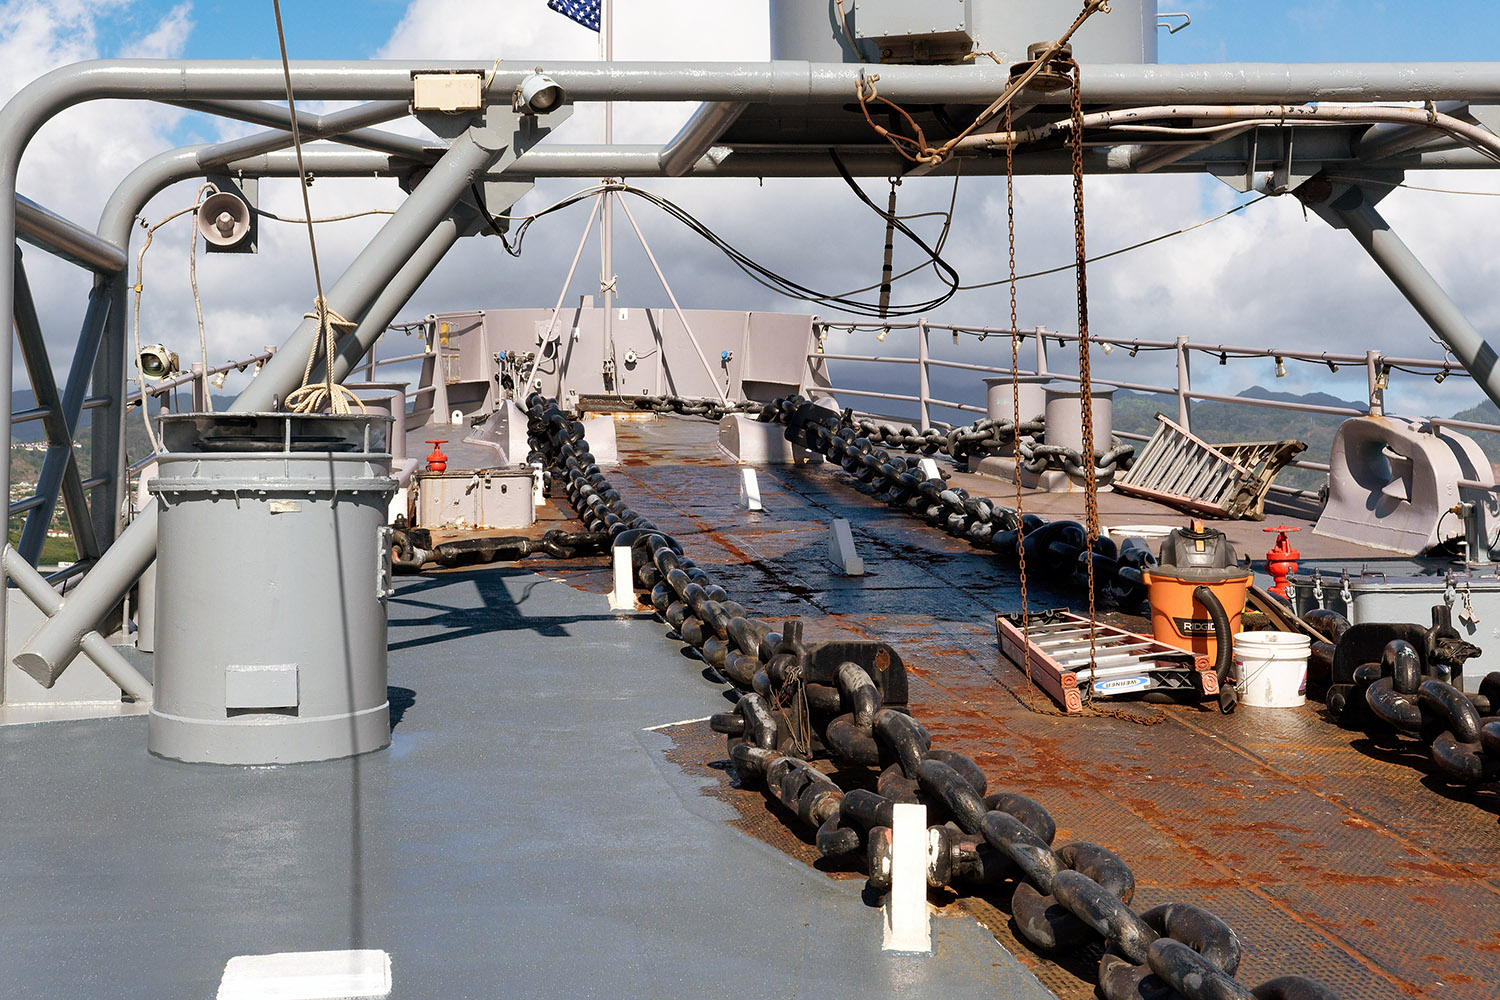 The enormous anchor chains are as oversized as the battleship itself